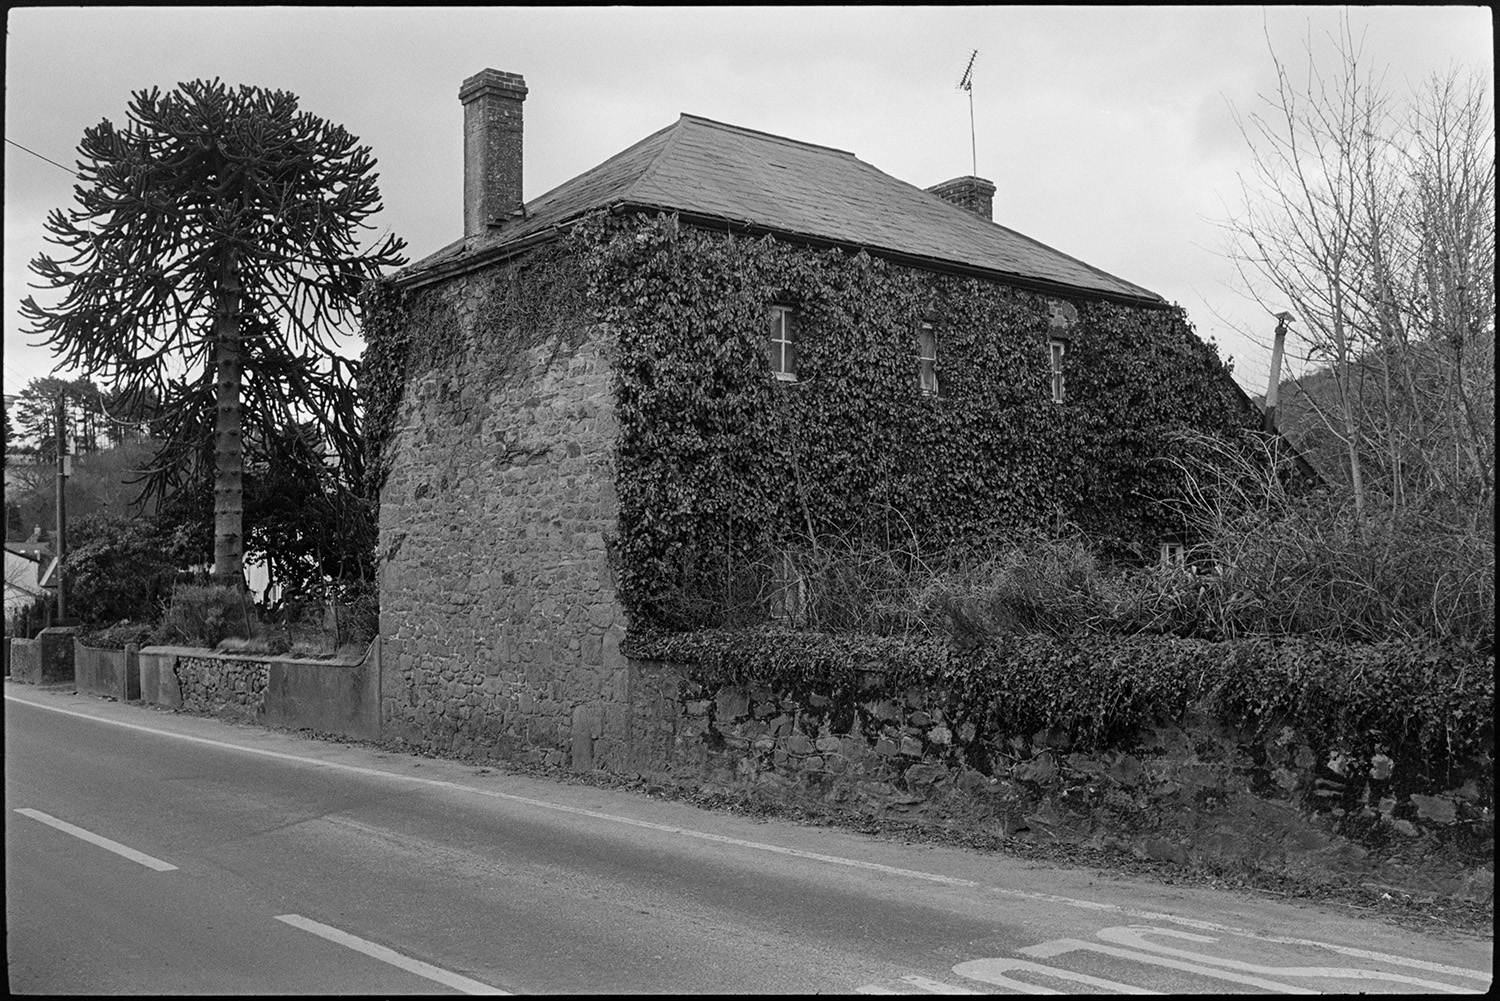 Ivy covered house.
[An ivy covered house with a Monkey Puzzle tree in the garden, at Taw Green.]